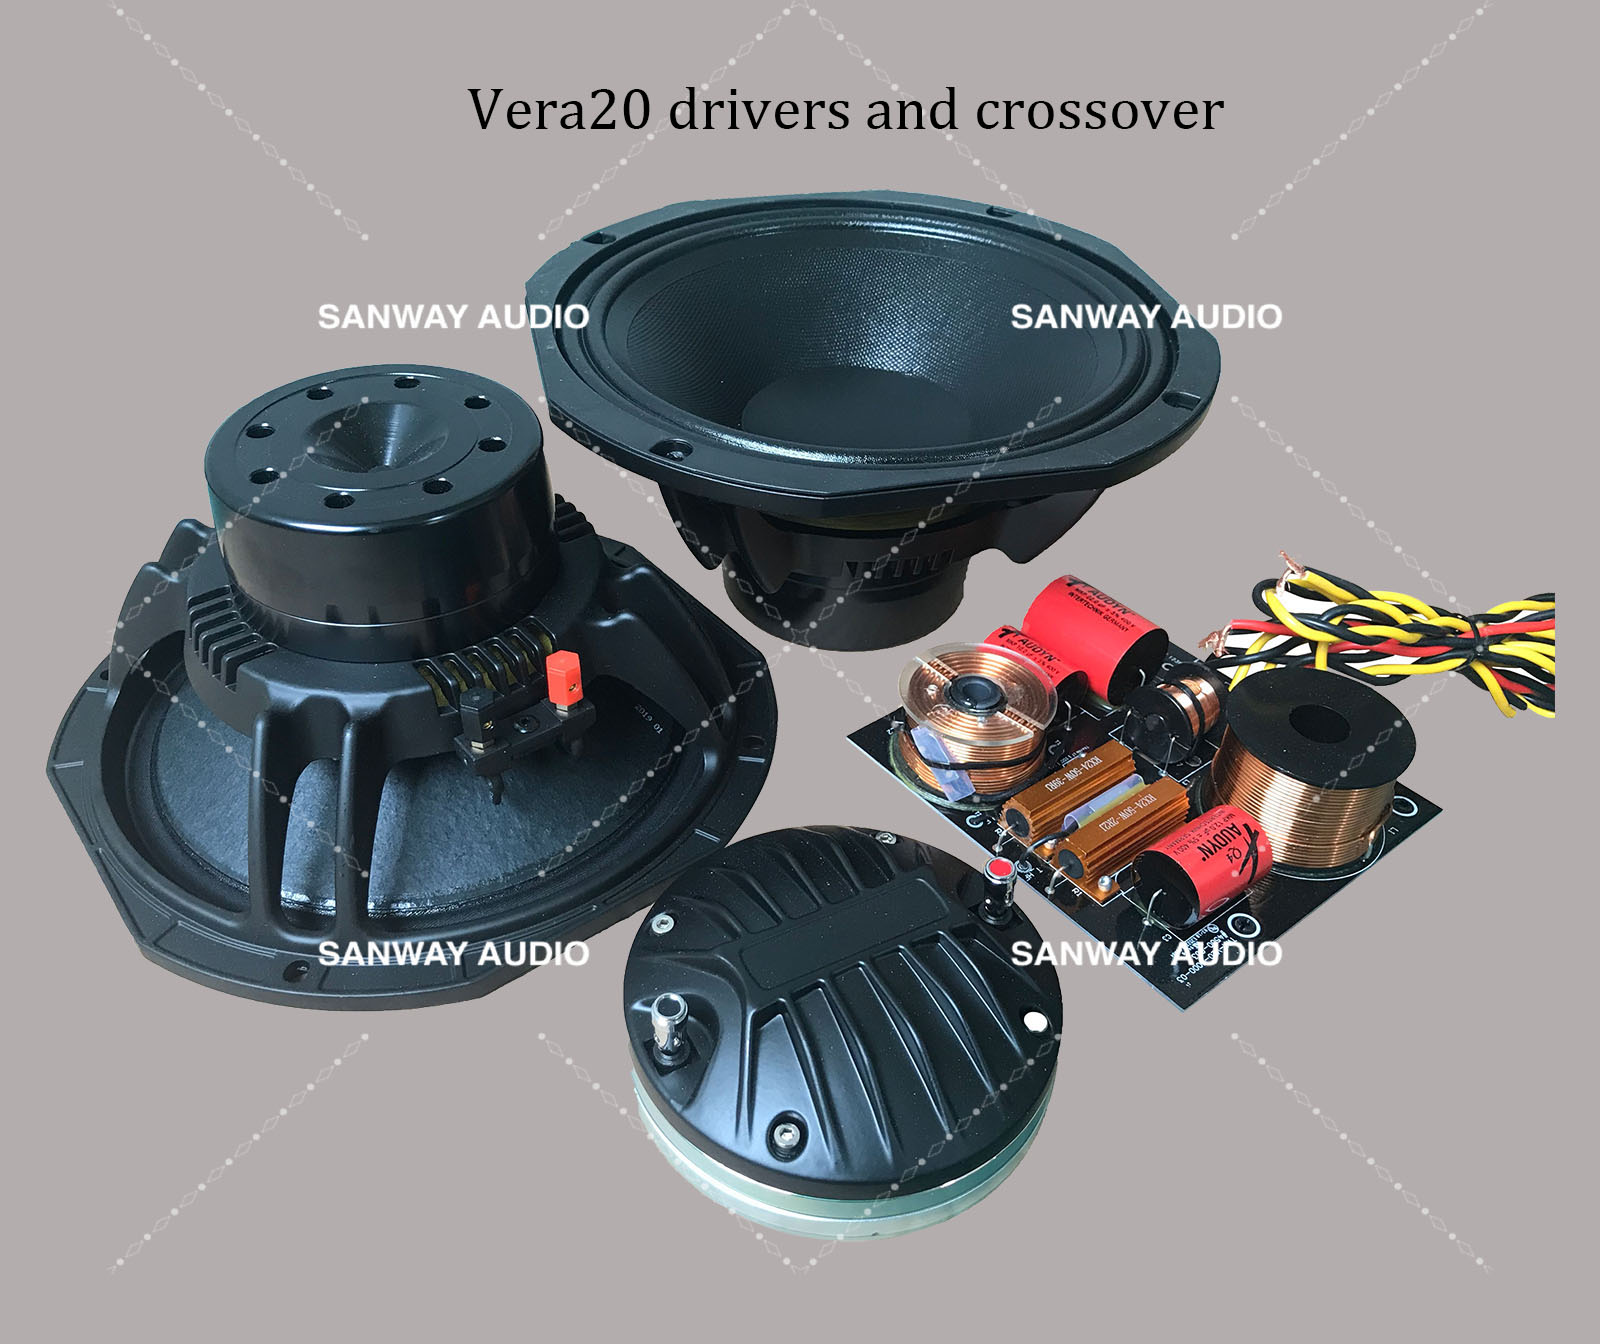 VERA20 drivers and crossover